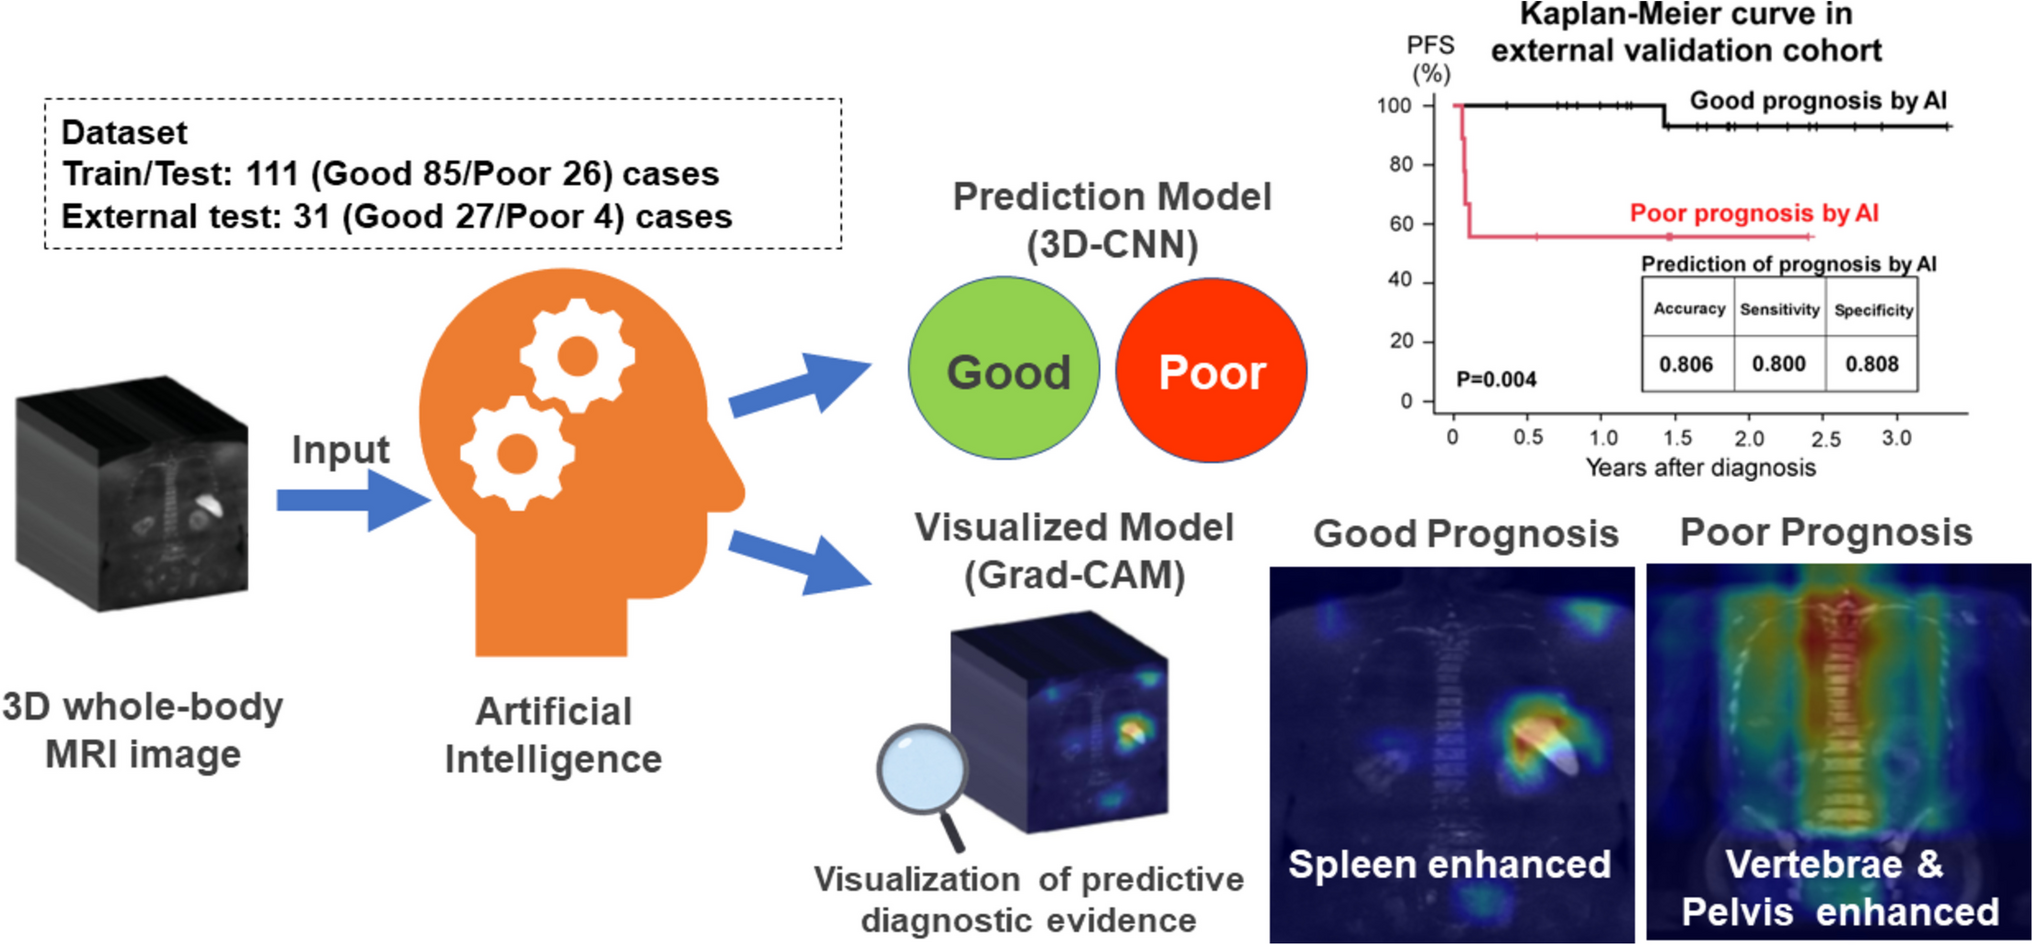 3D CNN-based Deep Learning Model-based Explanatory Prognostication in Patients  with Multiple Myeloma using Whole-body MRI